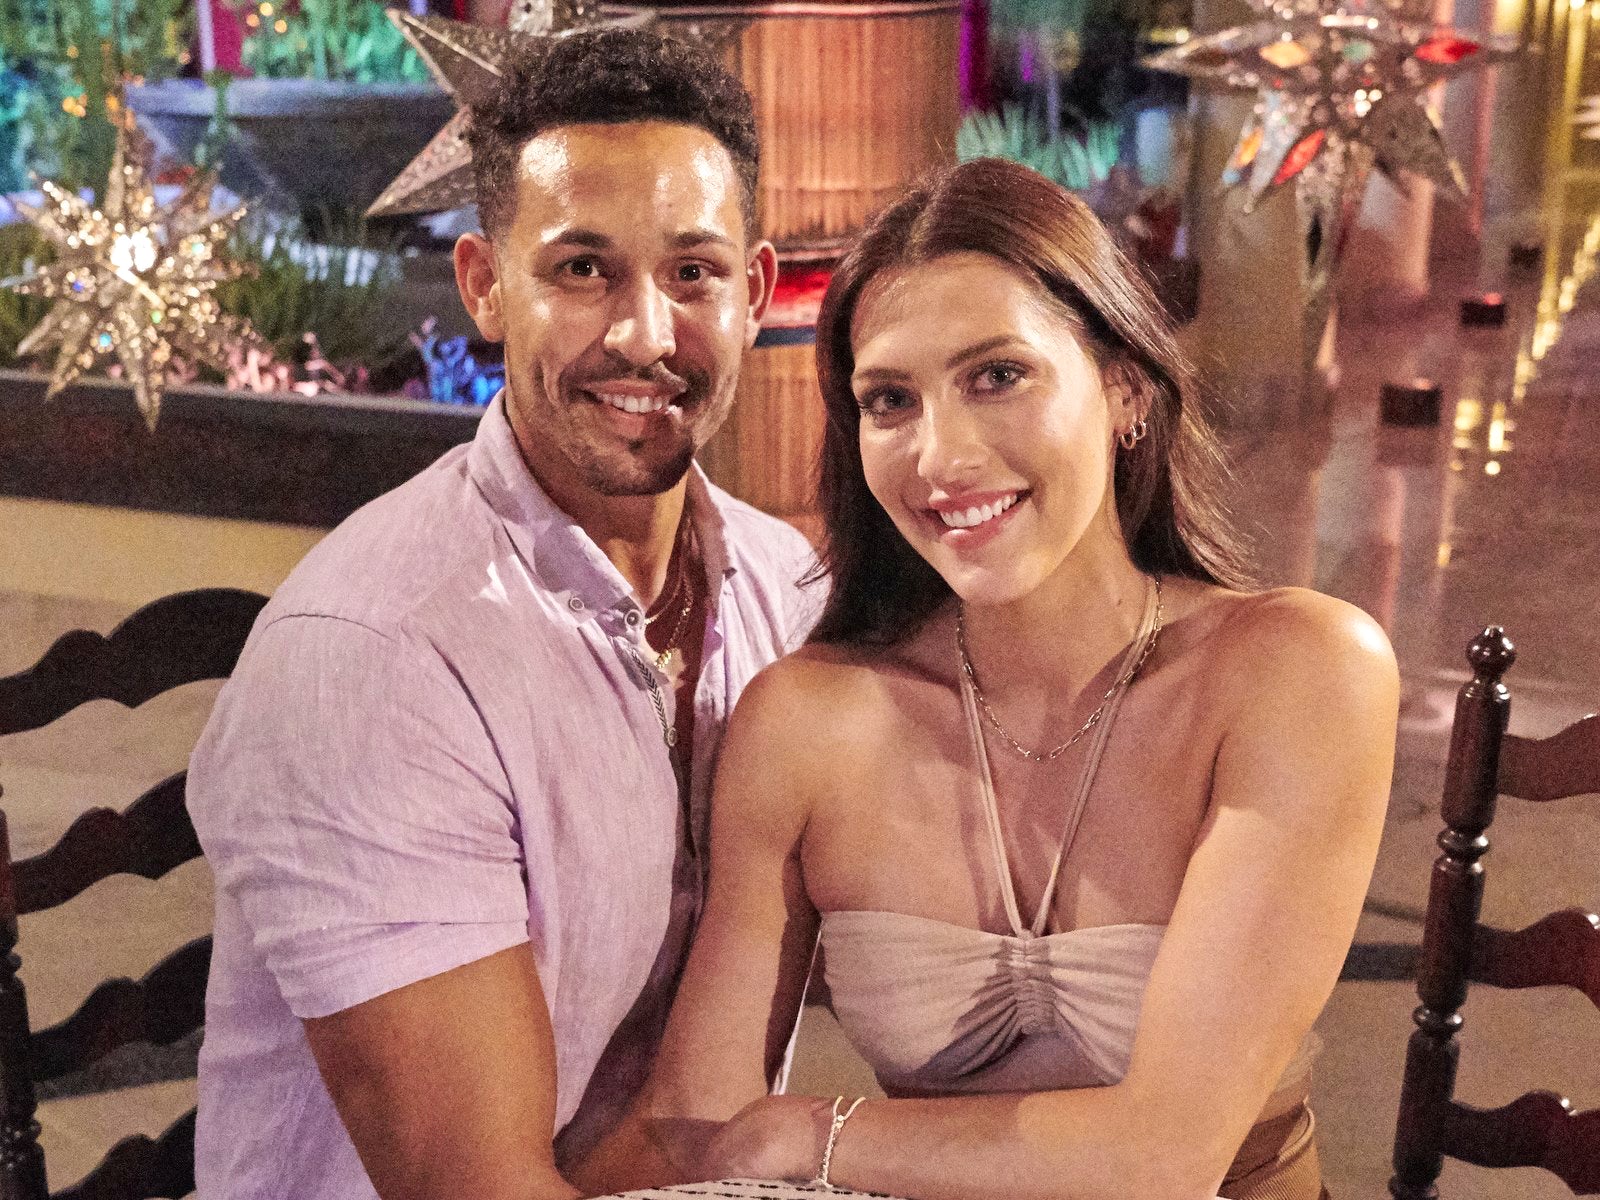 'Bachelor in Paradise' spoilers Are Becca Kufrin and Thomas Jacobs